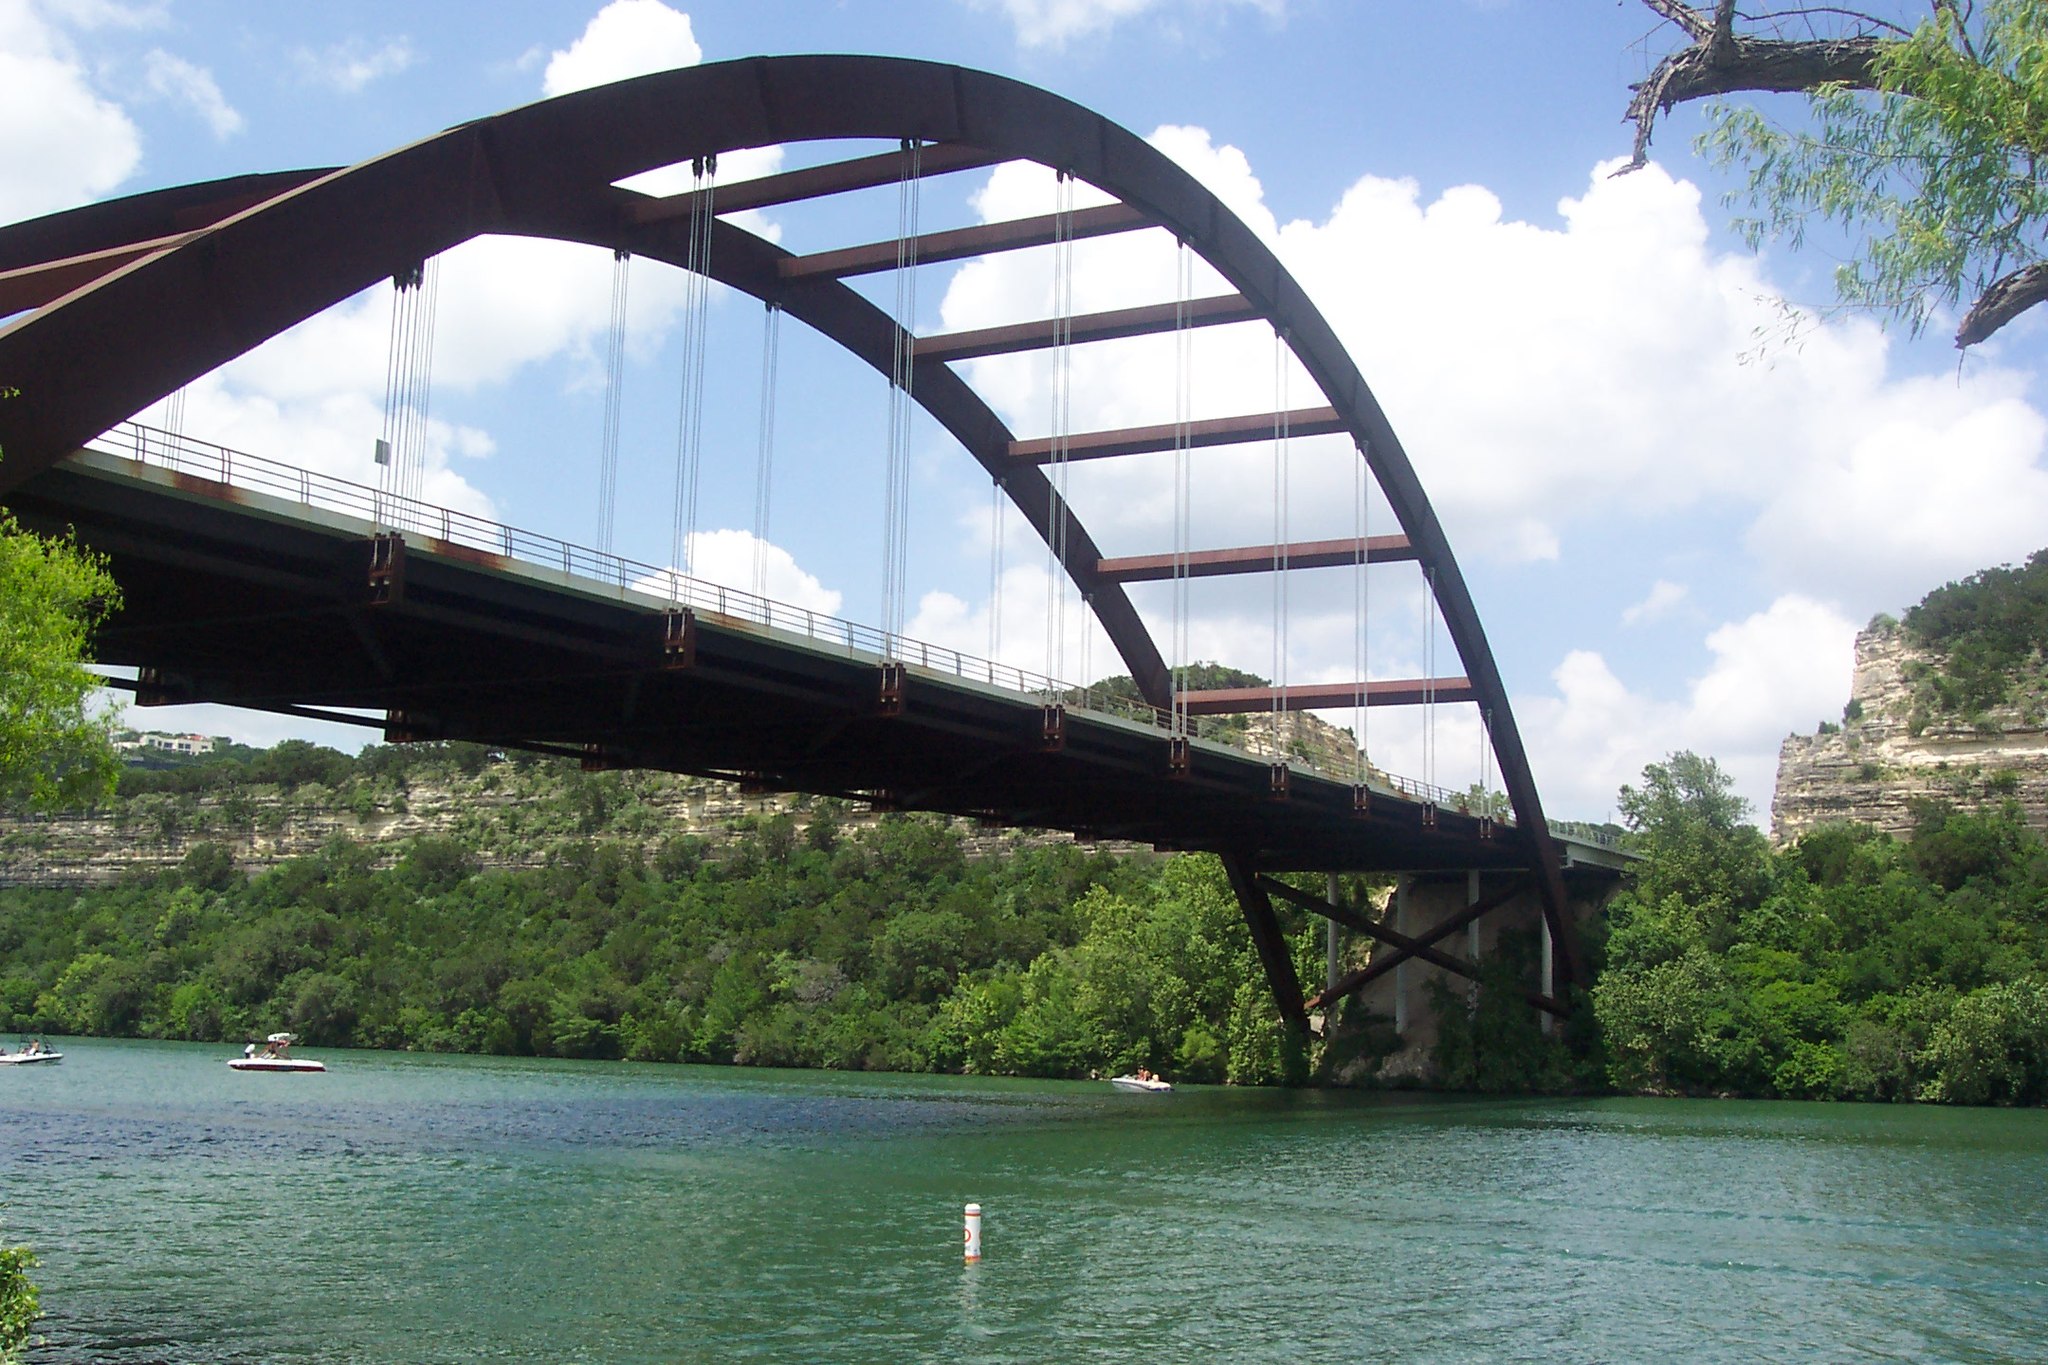 austin-water-lays-the-path-forward-for-the-next-100-years-of-water